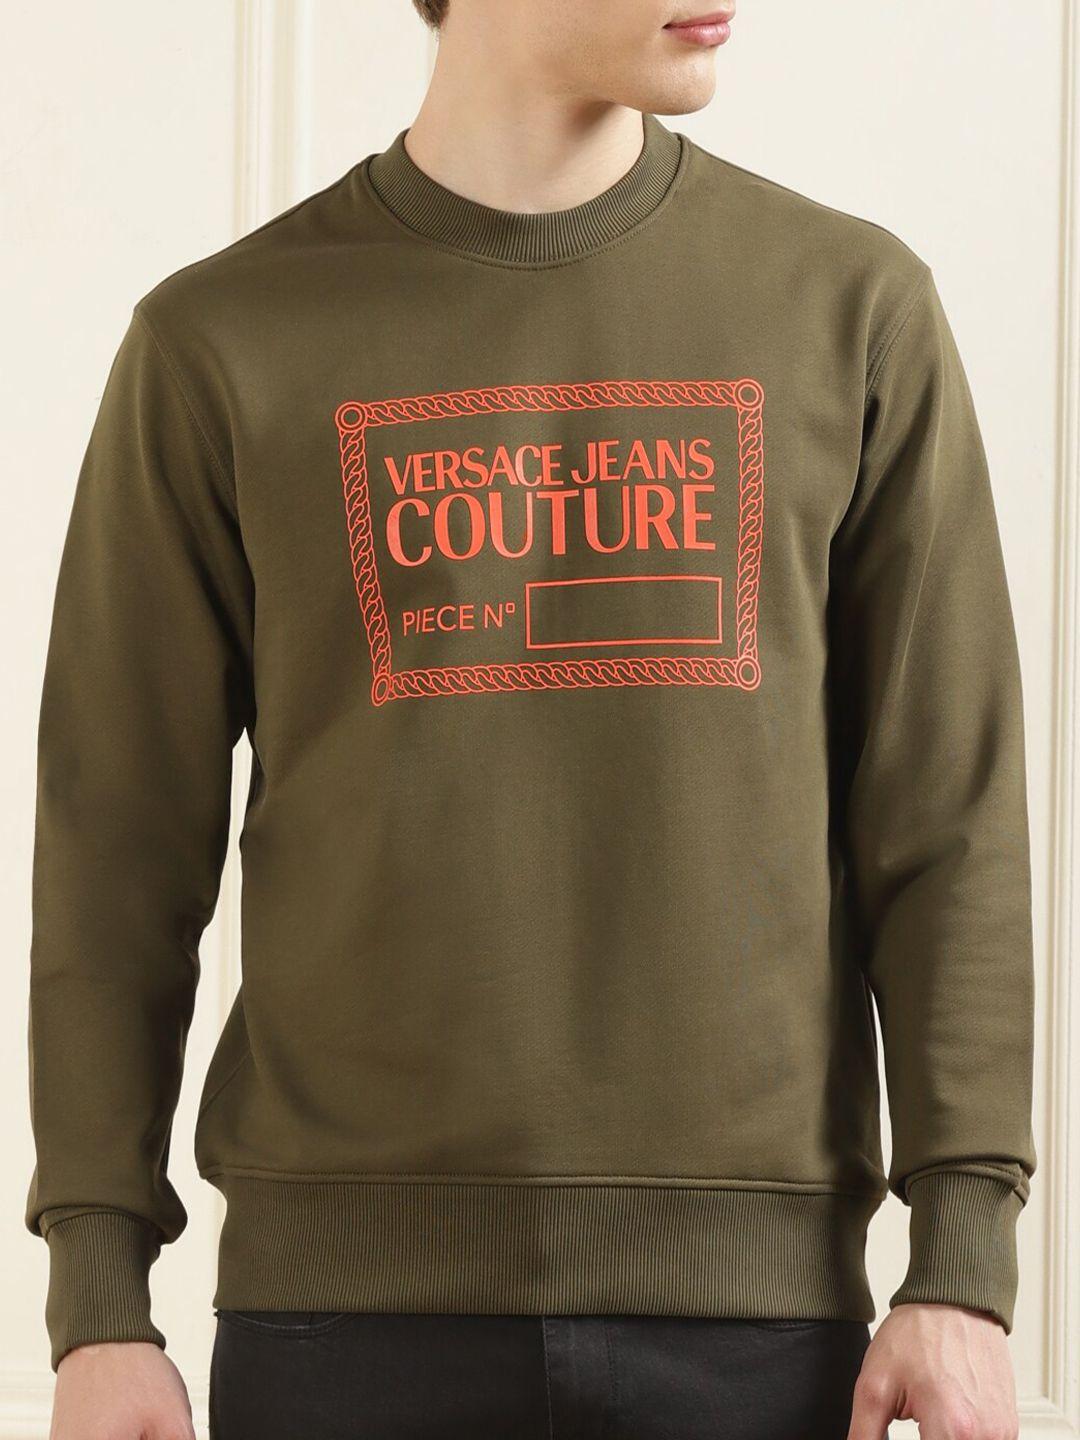 versace-jeans-couture-typography-printed-cotton-pullover-sweatshirt